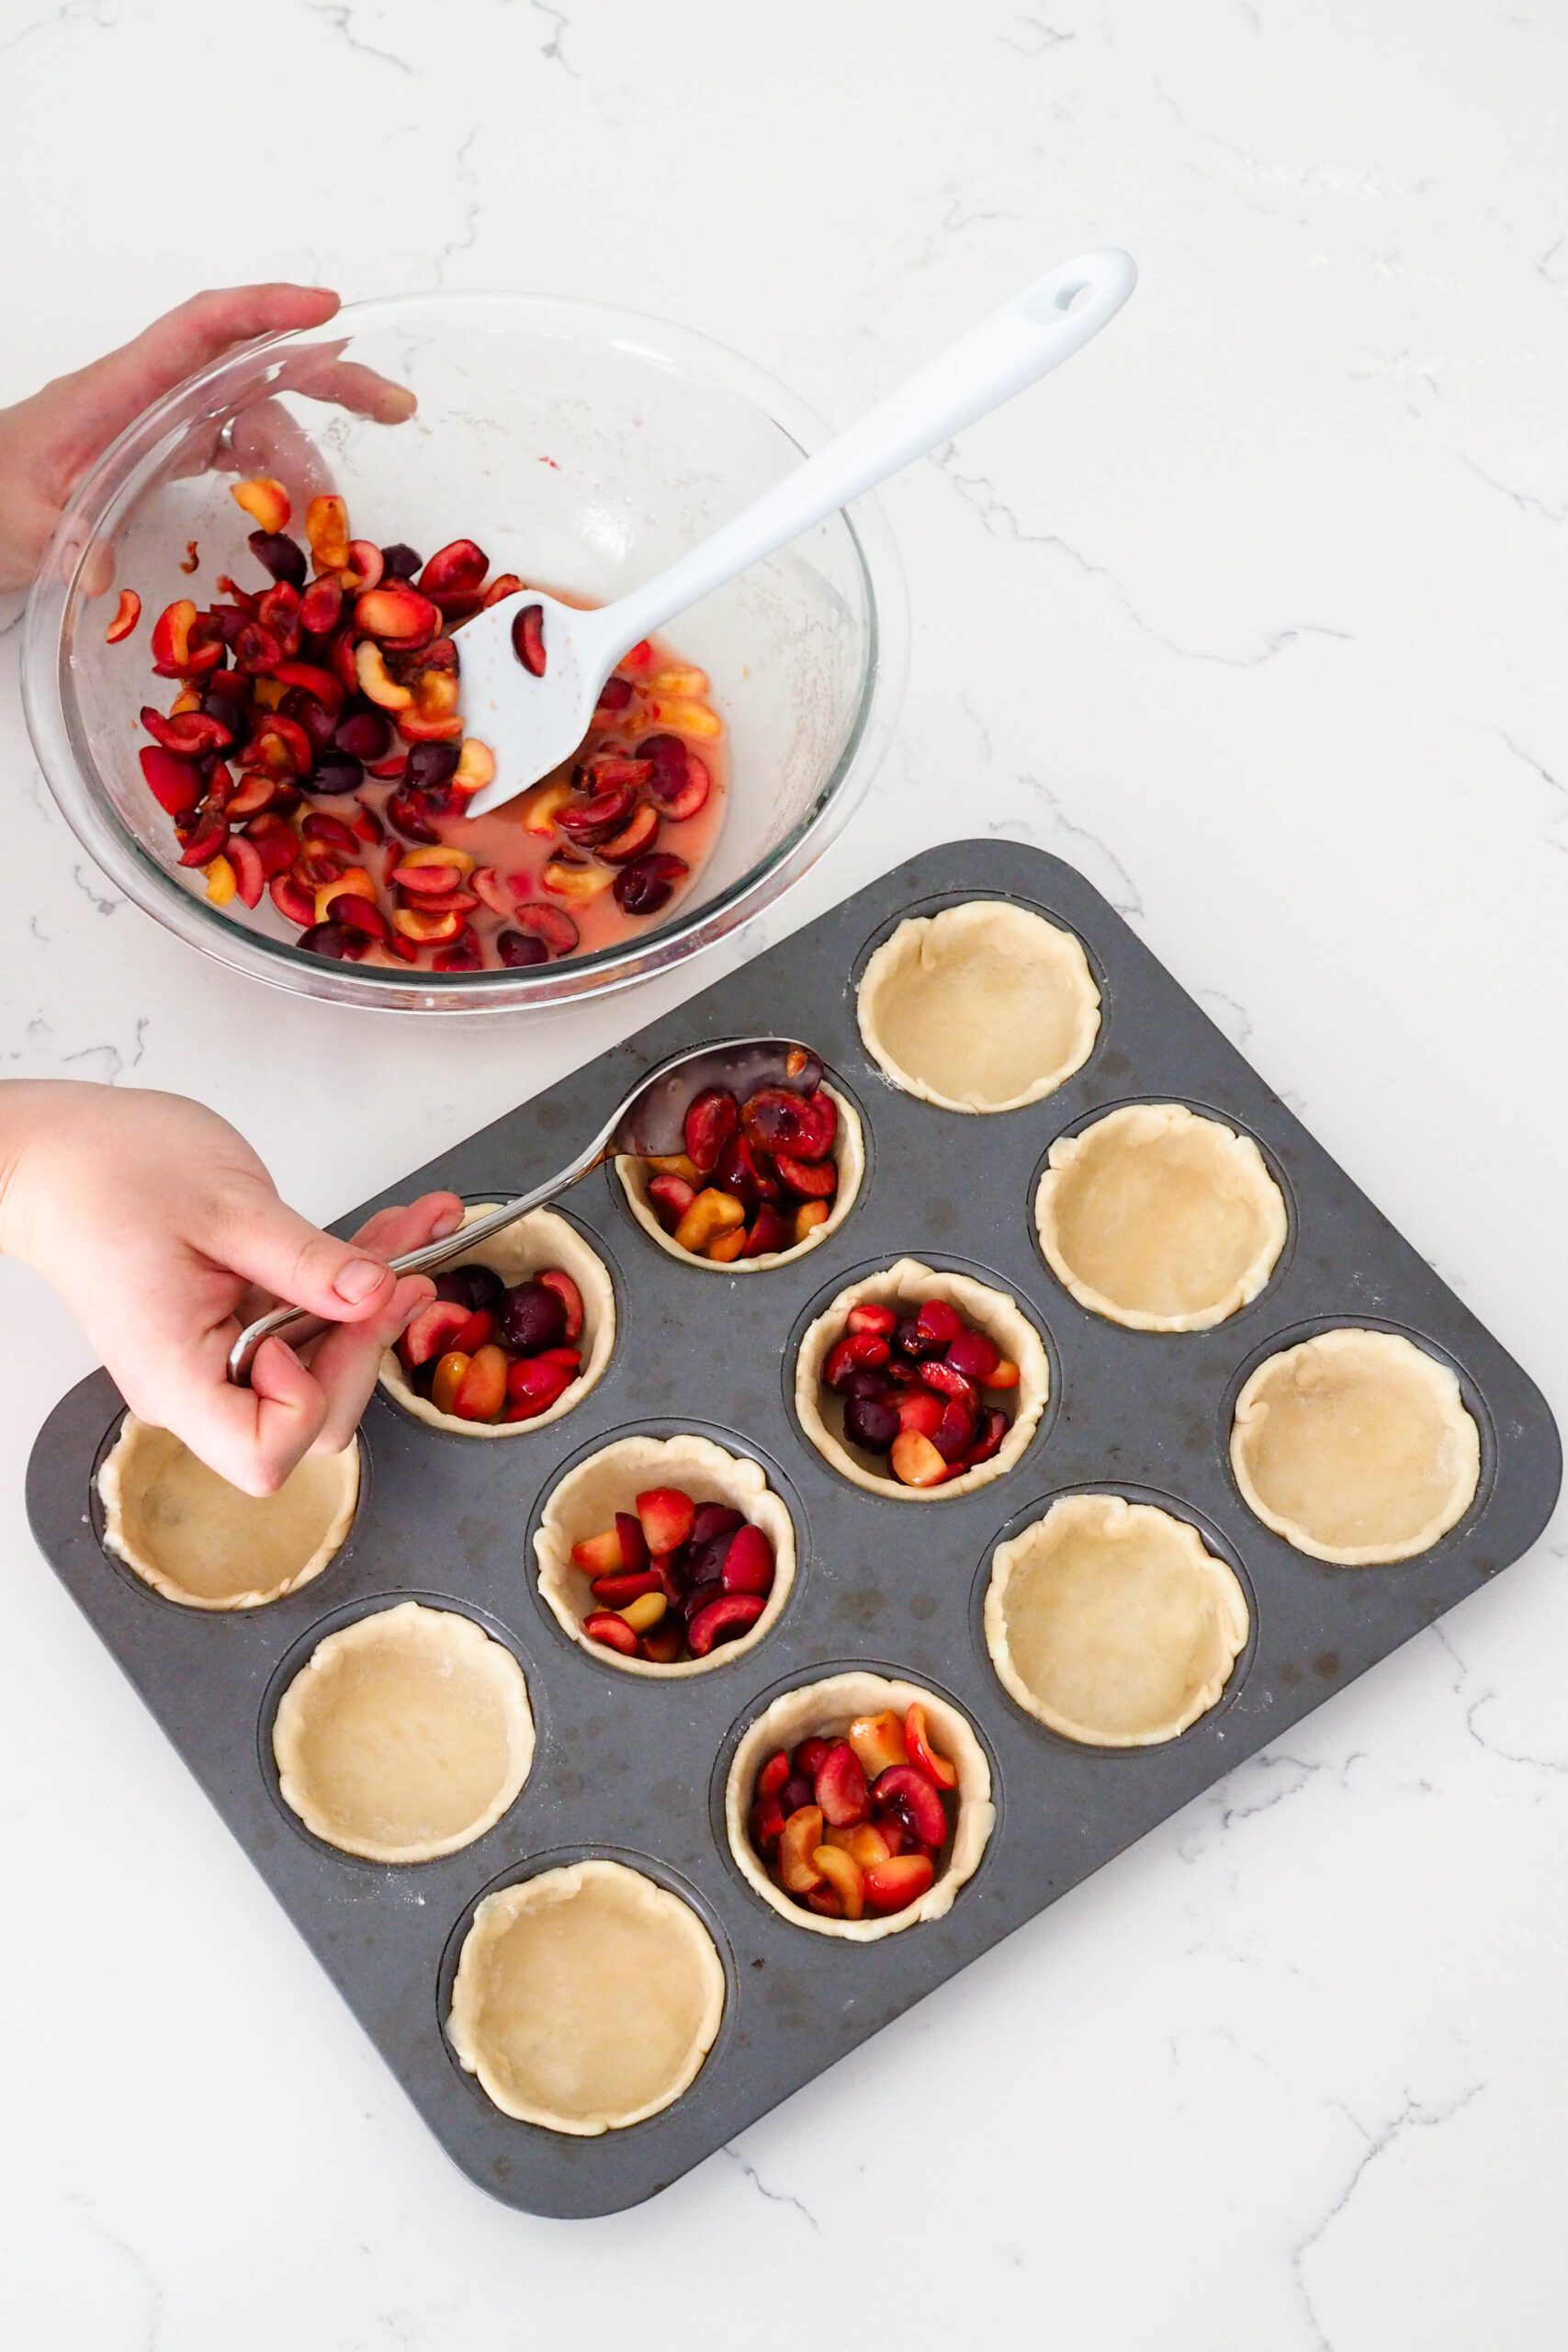 A hand uses a tablespoon to spoon cherries into mini pies.